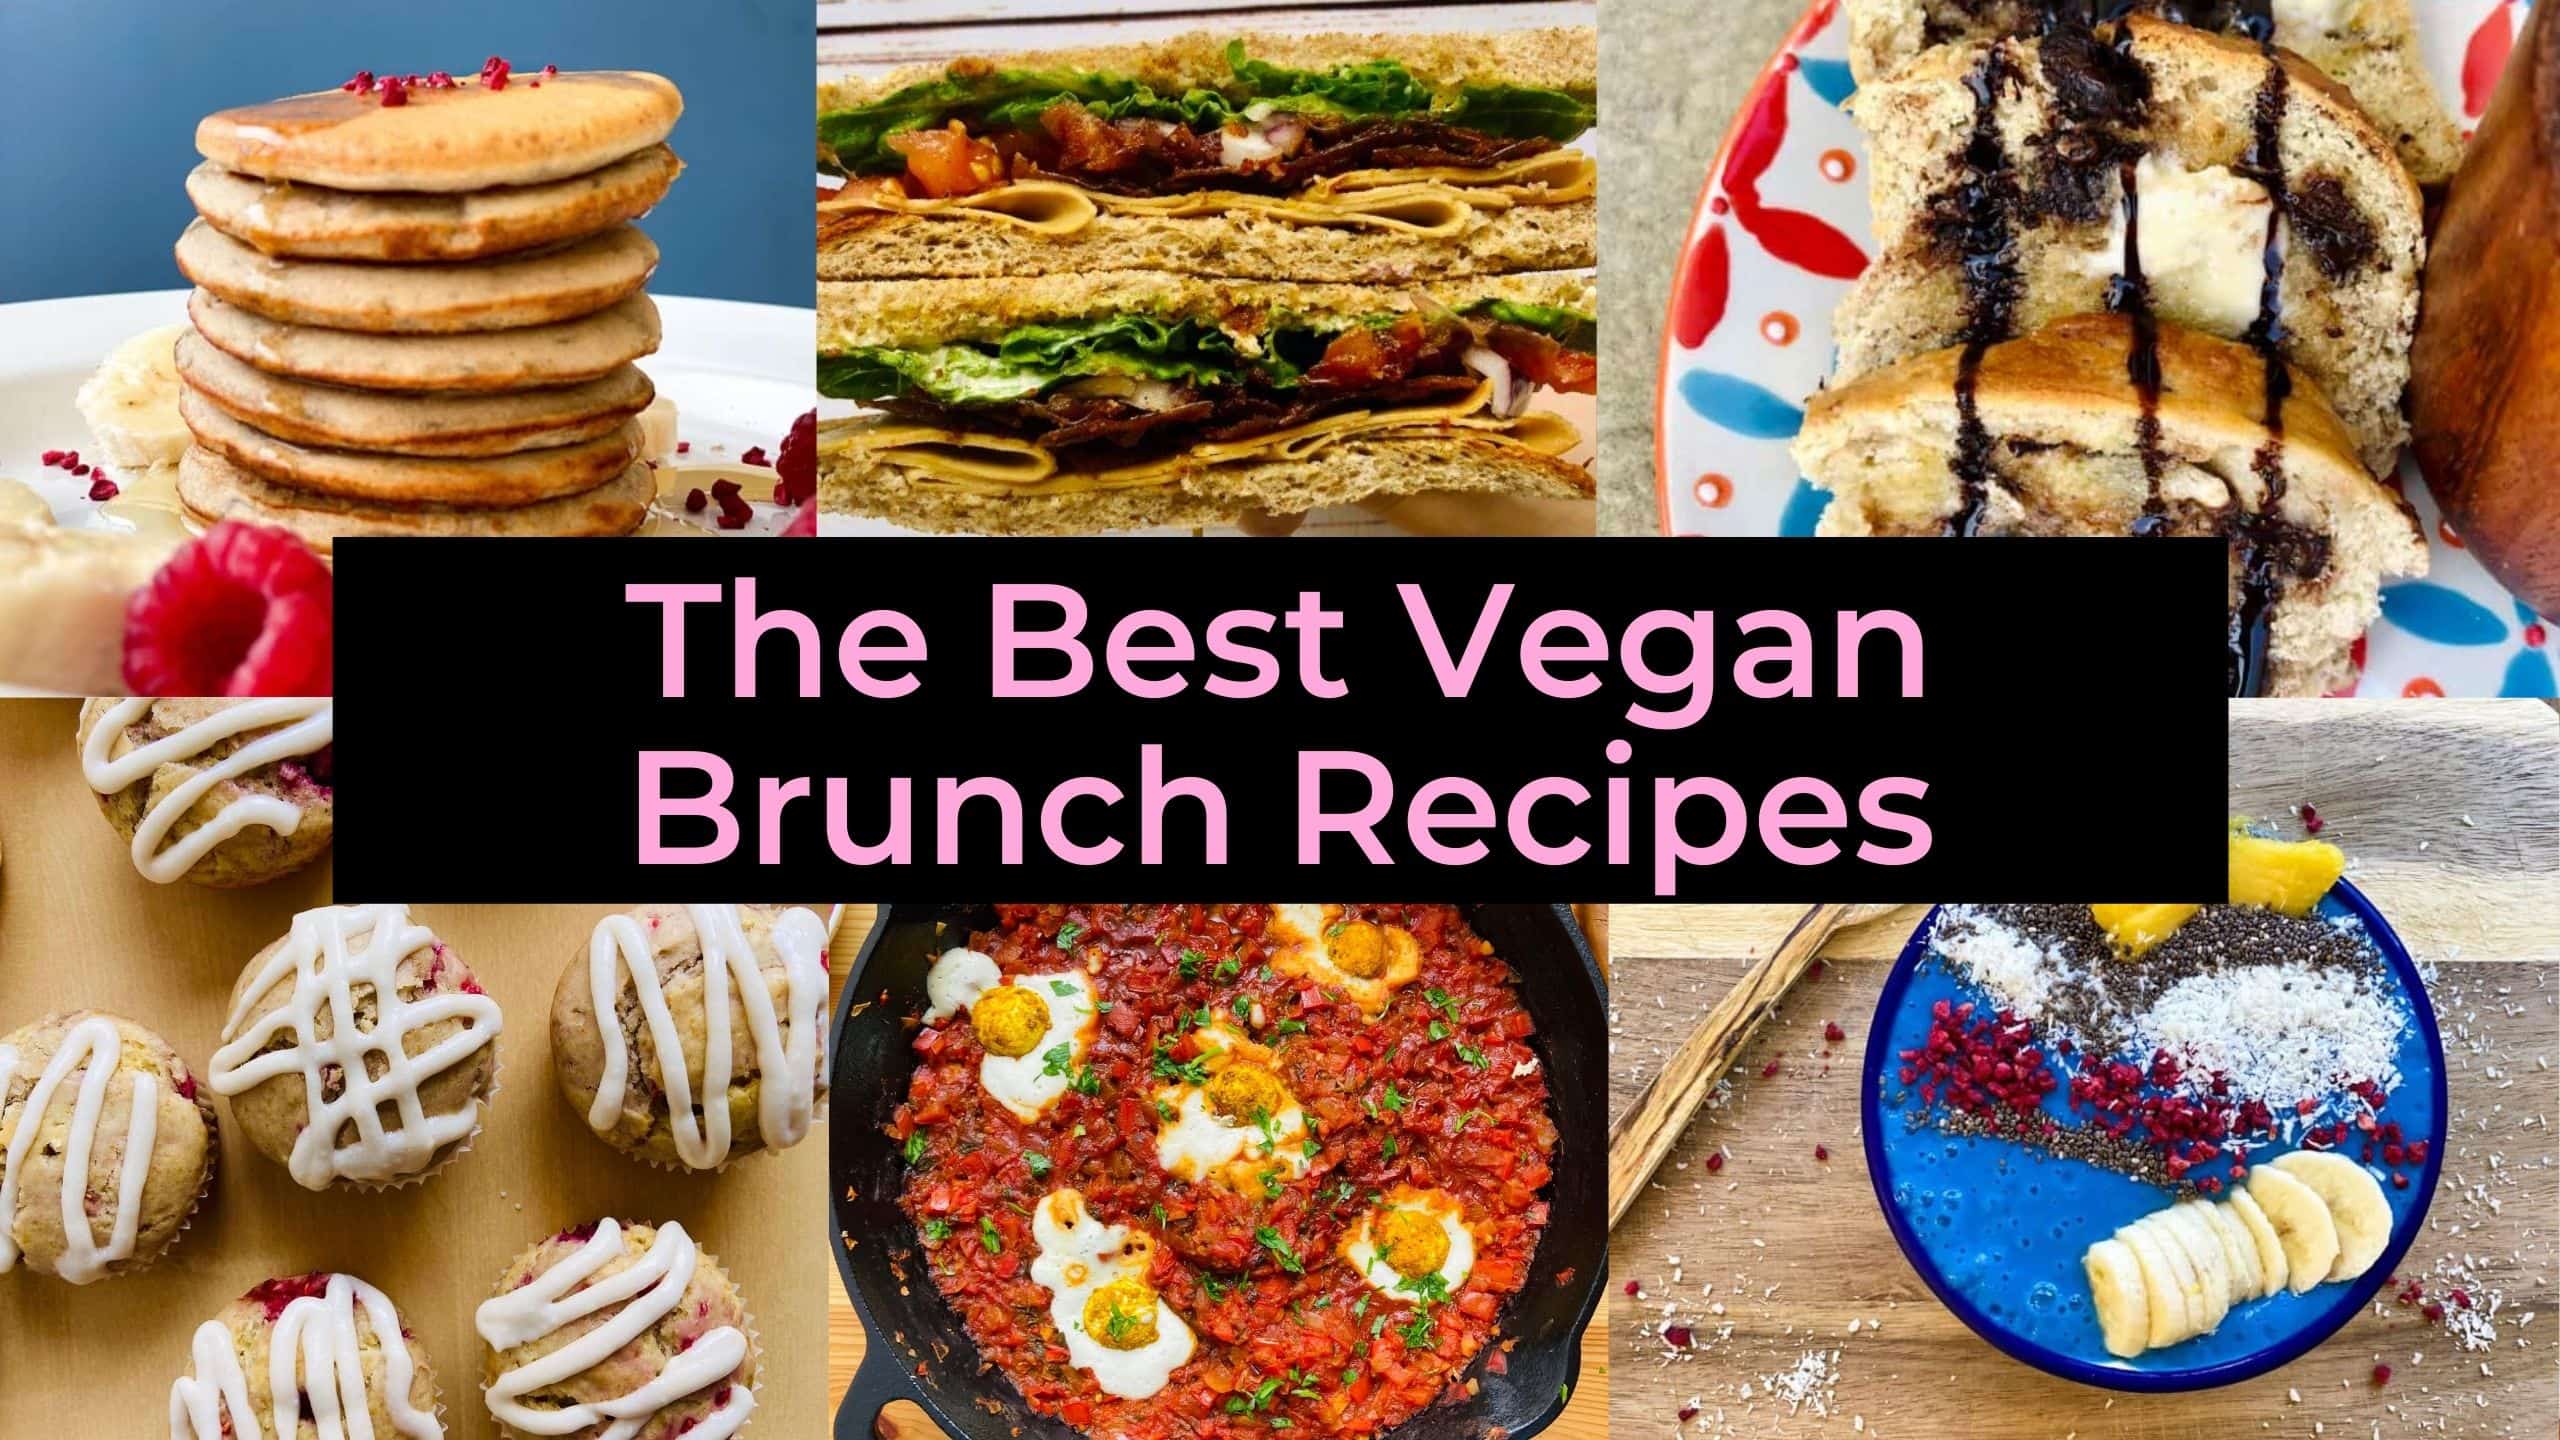 The Ultimate Vegan Brunch Ideas and Recipes